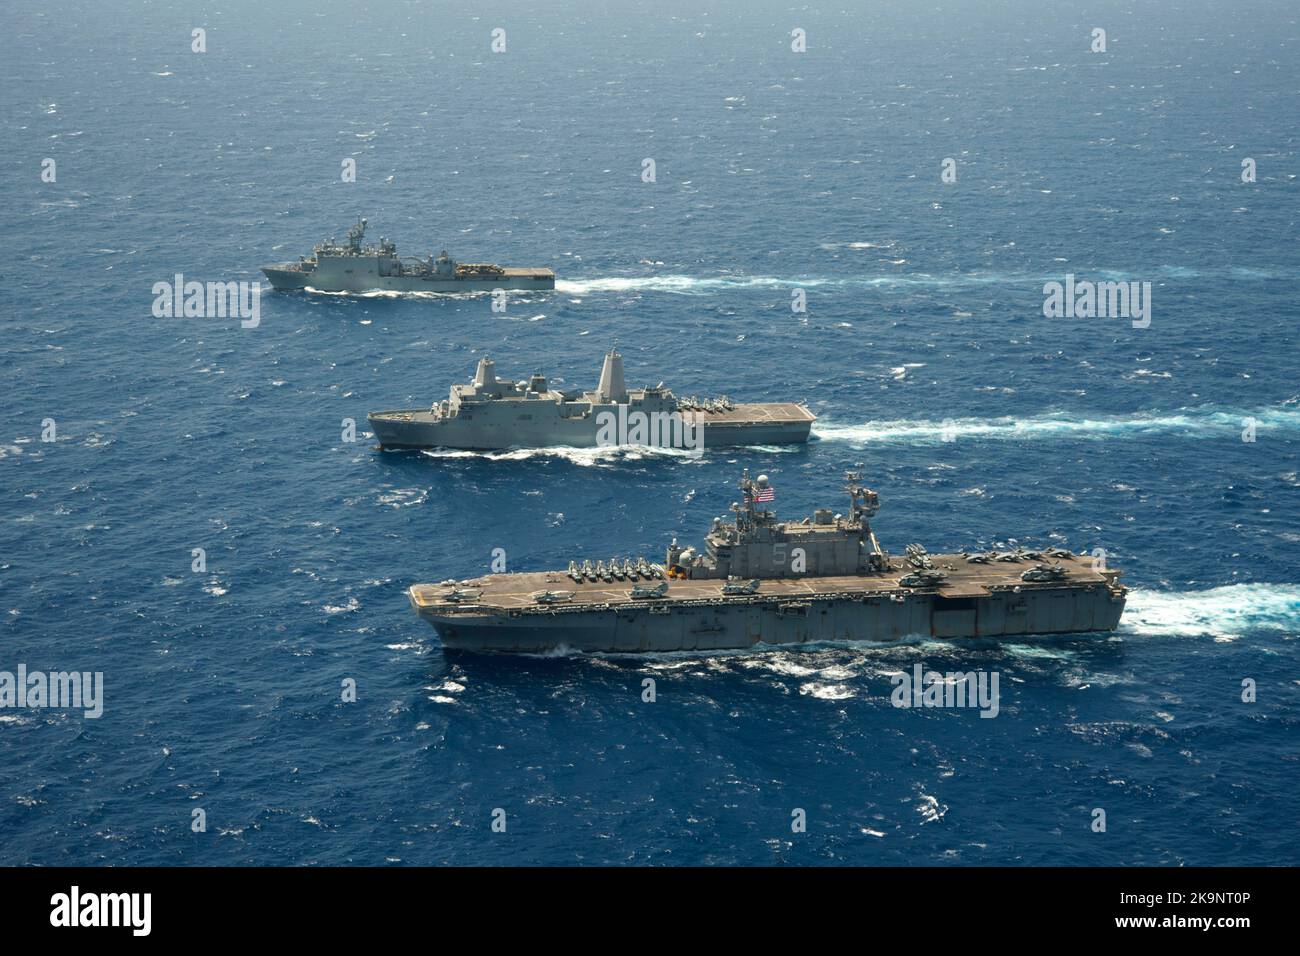 The amphibious assault ship USS Peleliu (LHA 5) transits the Pacific Ocean with the amphibious transport dock ship USS Green Bay (LPD 20), middle, and the amphibious dock landing ship USS Rushmore (LSD 47). Stock Photo